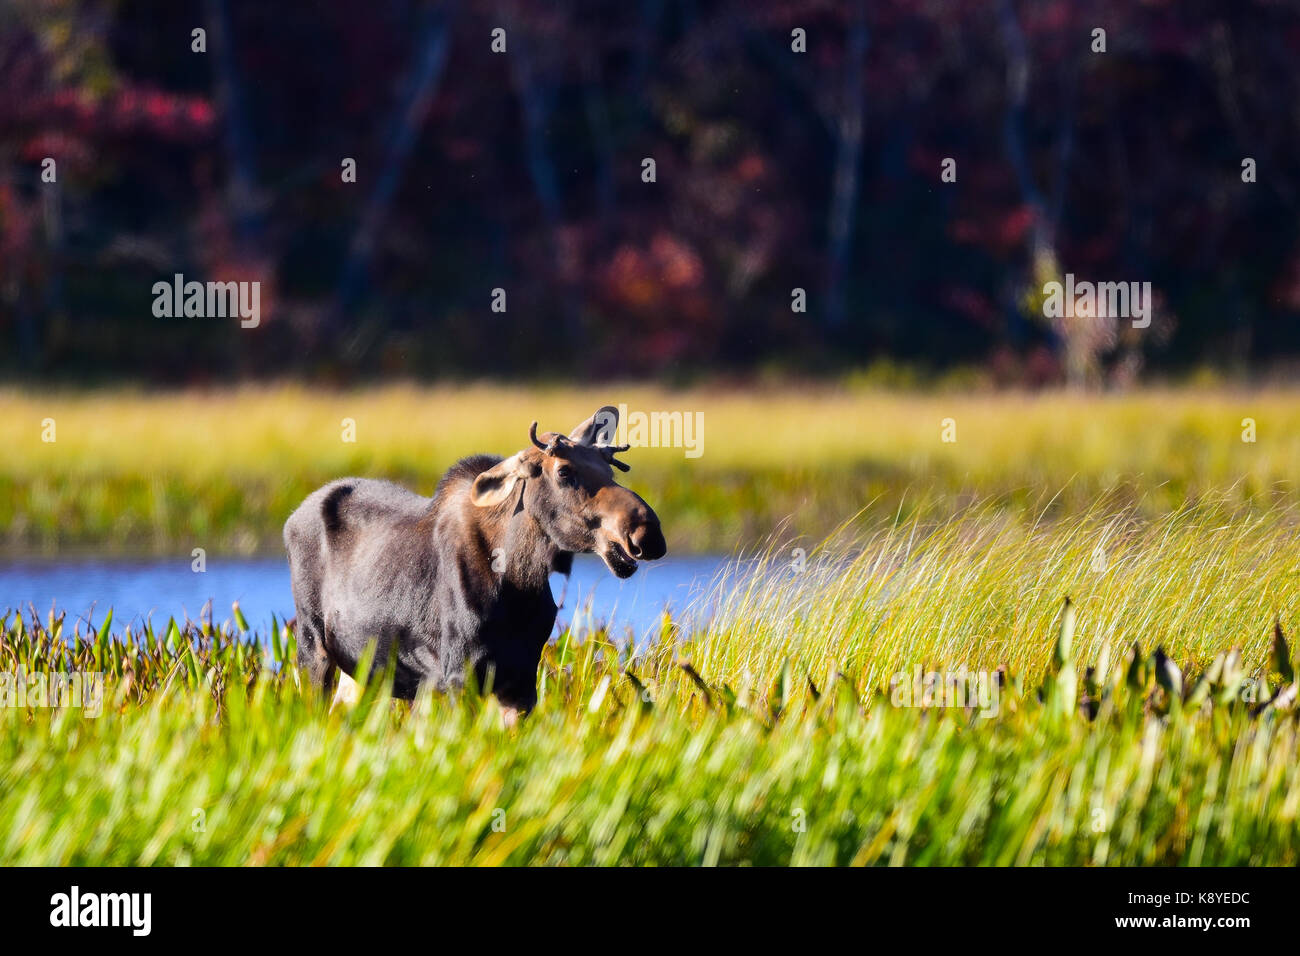 Yearling bull moose (Alces alces) standing in a grassy meadow along the Sacandaga River in the Adirondack Mountains wild forest singing. Stock Photo